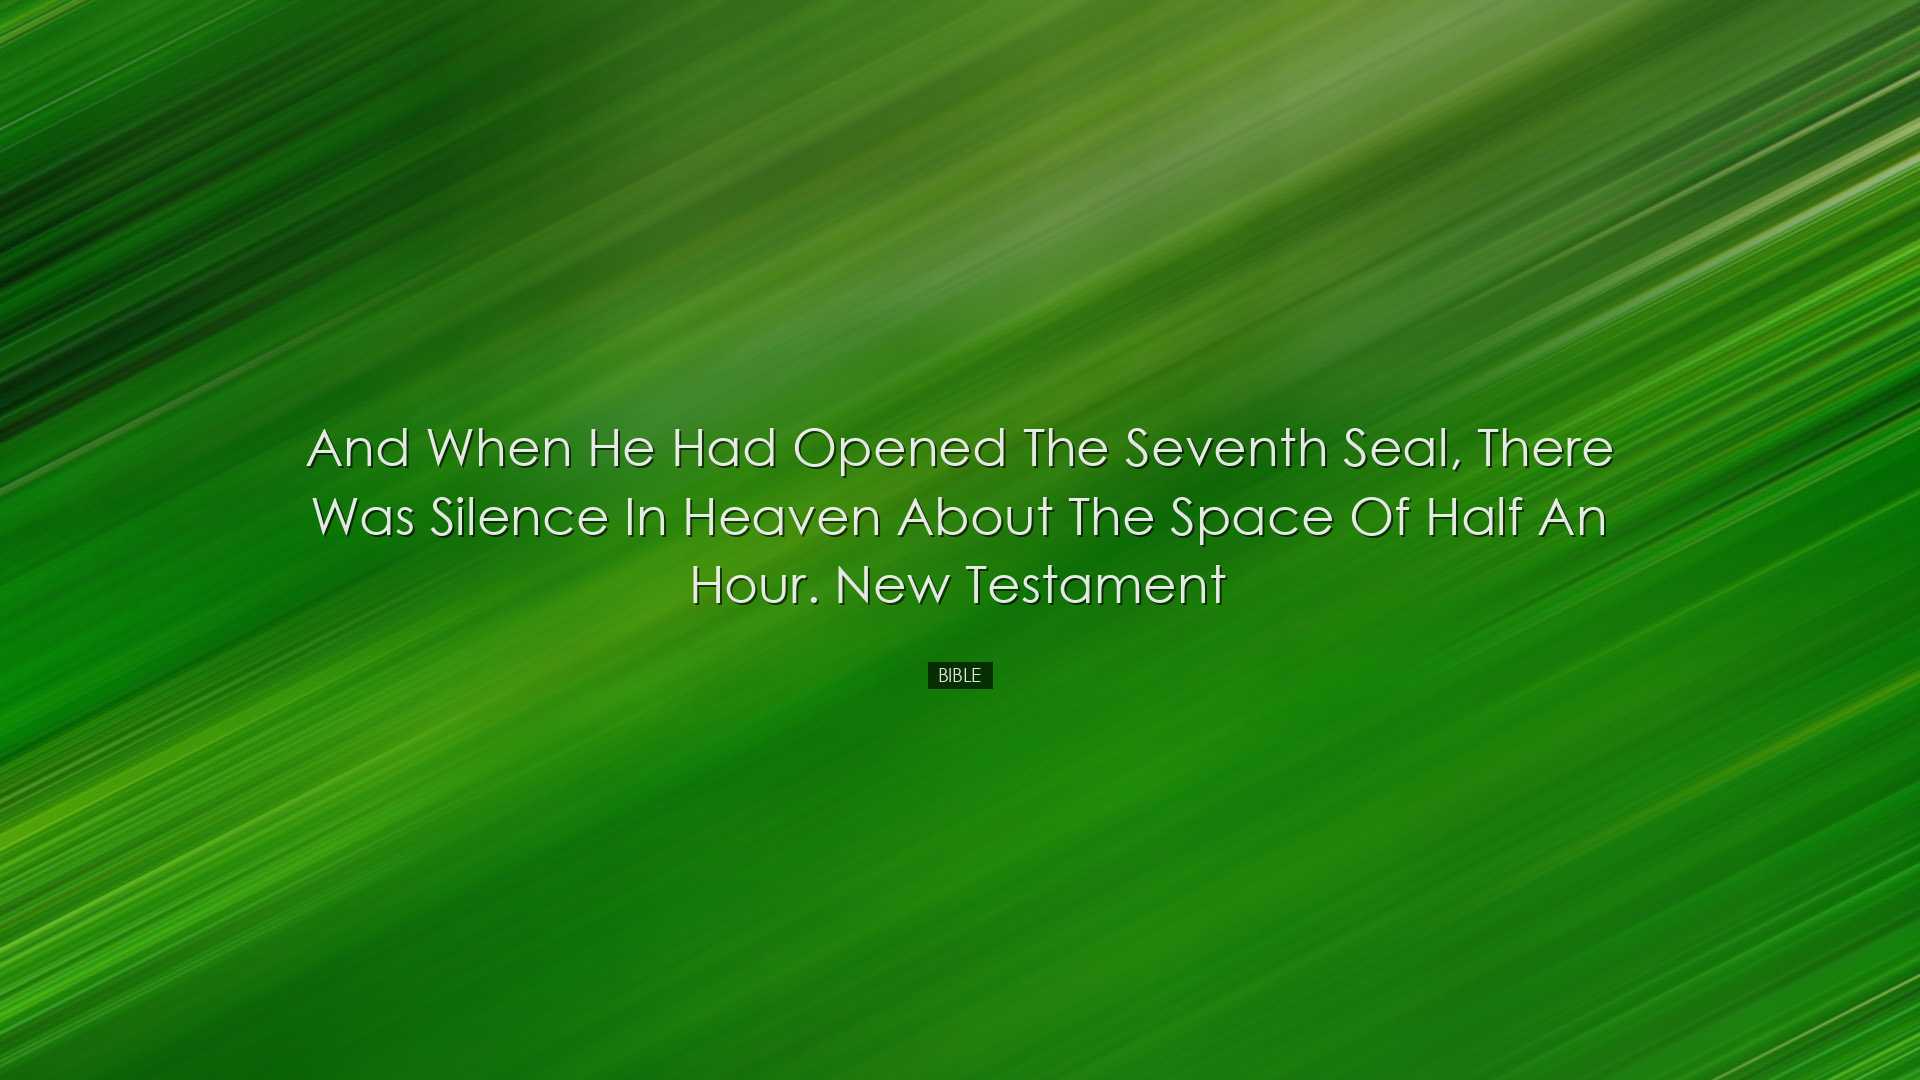 And when he had opened the seventh seal, there was silence in heav